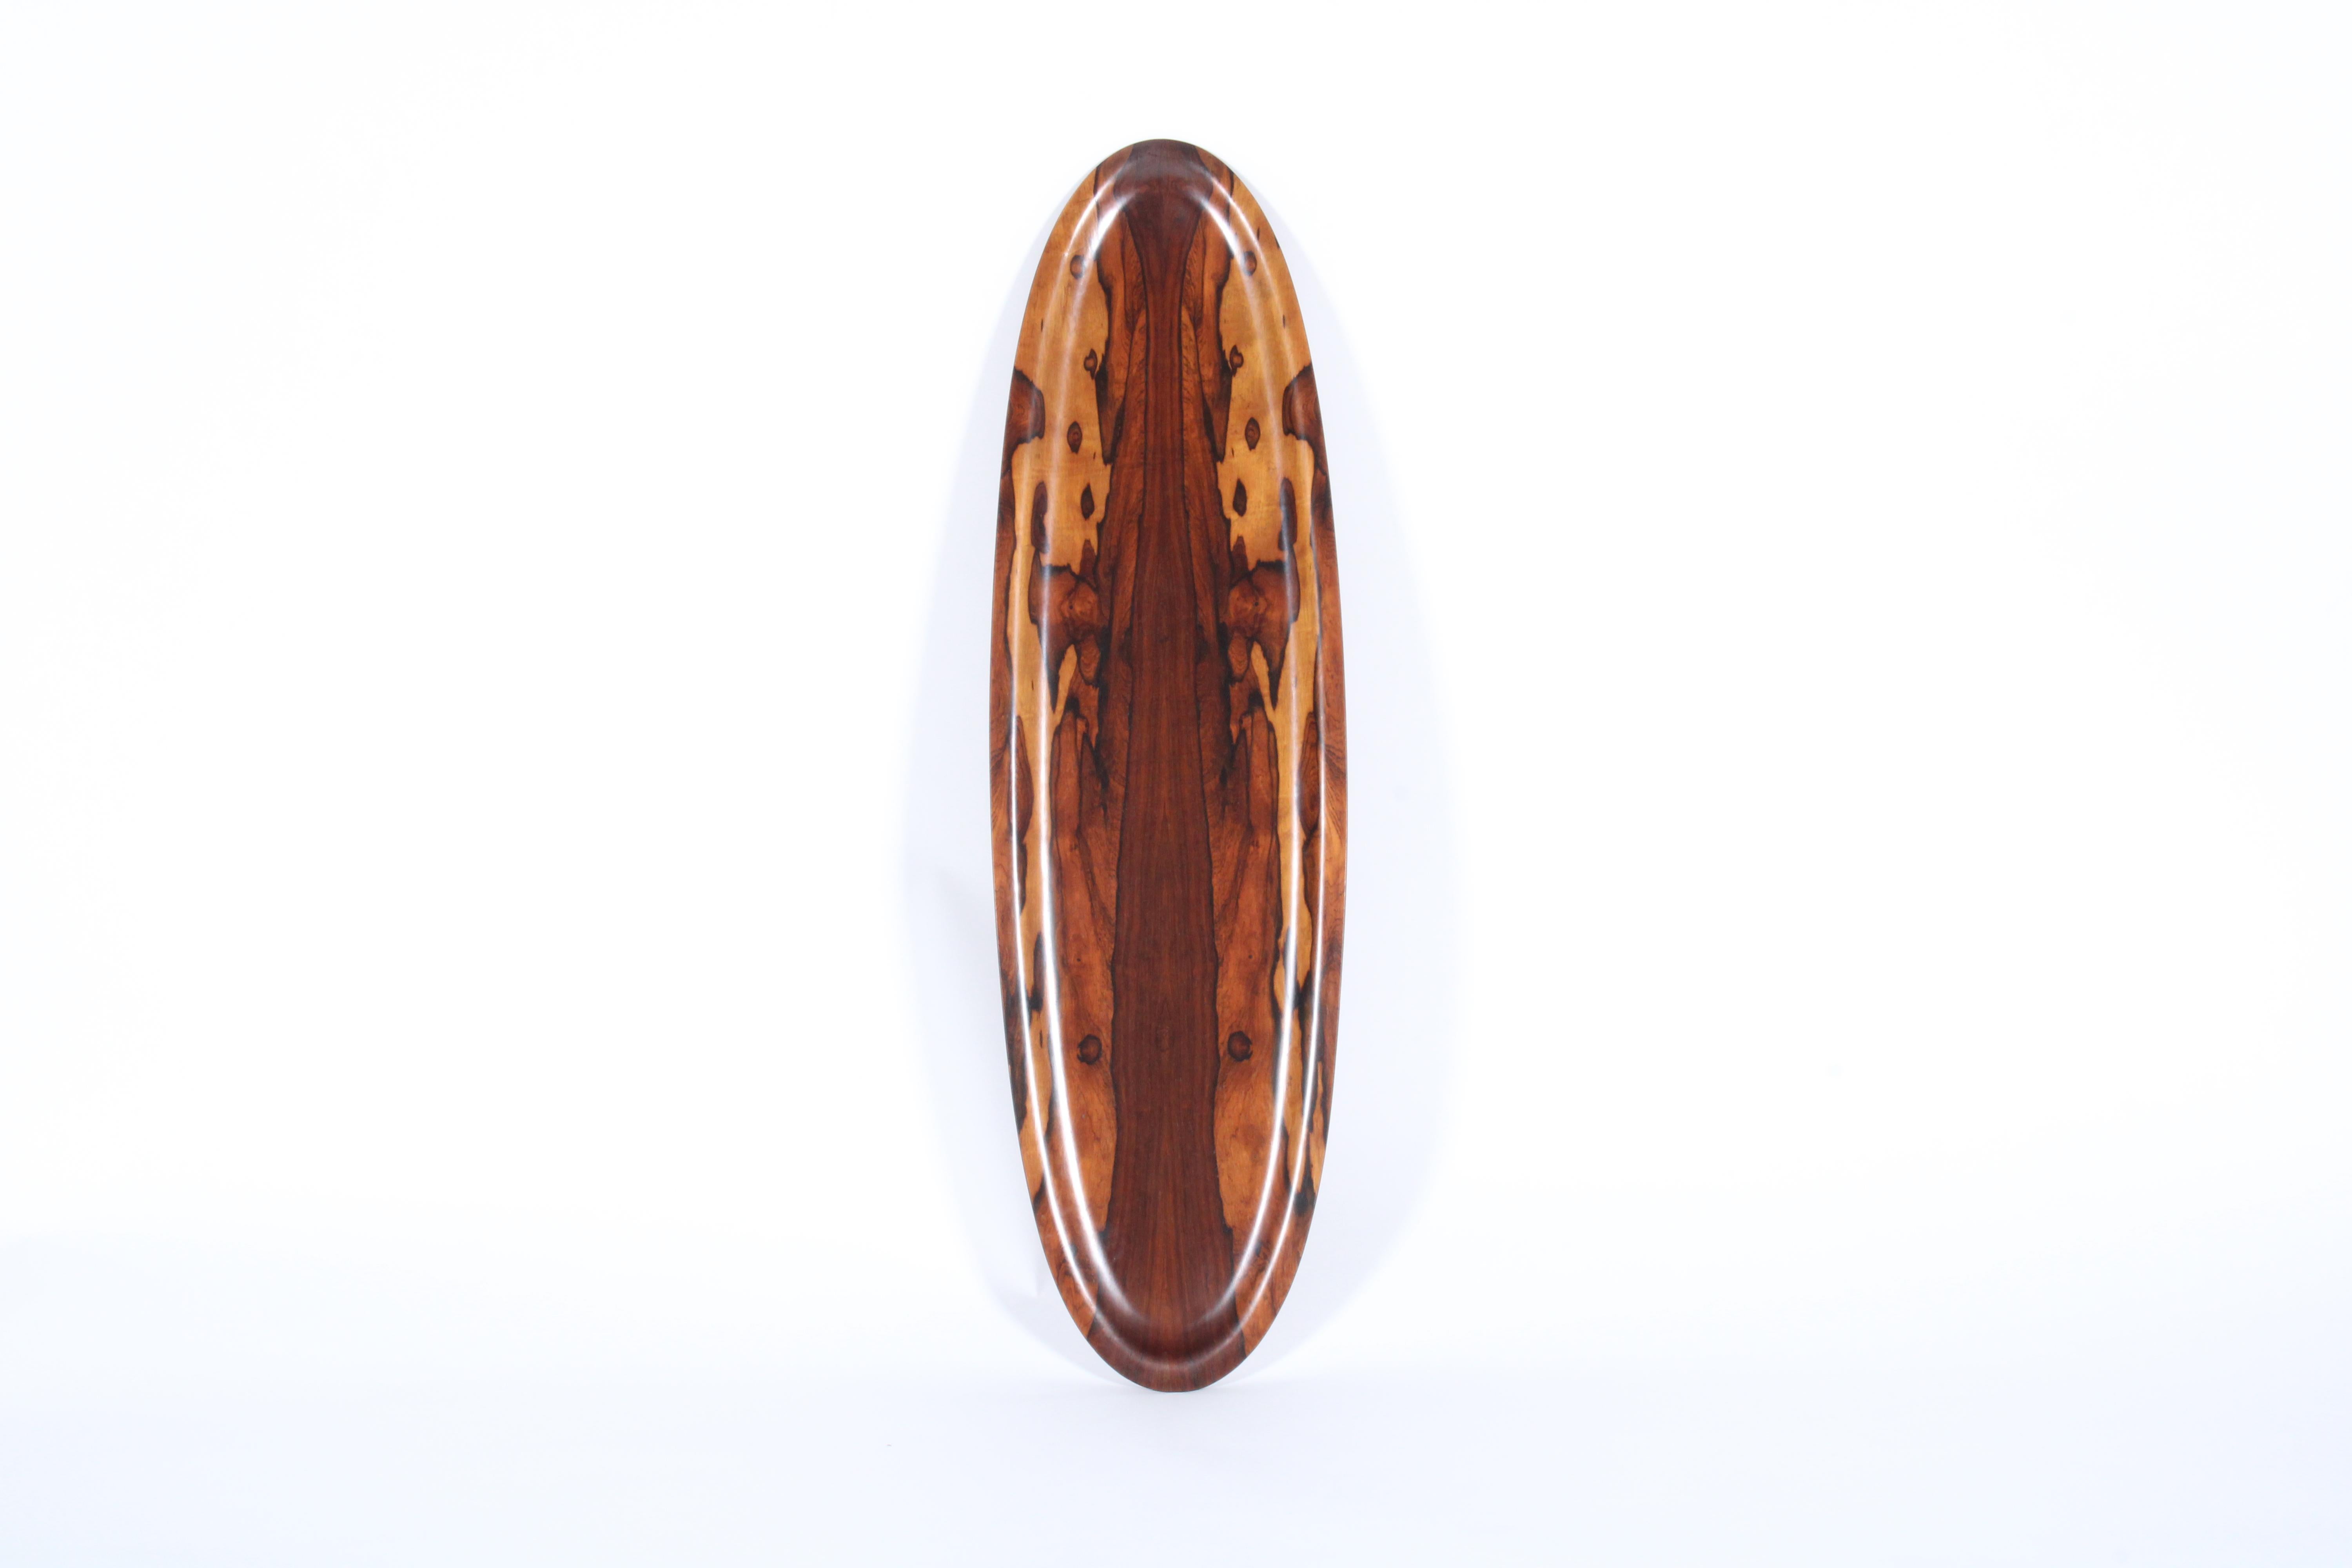 A truly rare find this incredibly beautiful canoe bowl centerpiece is crafted from the most amazing jacaranda wood, a rare timber with sensational grain pattern which was typically used in high end mid century pieces by celebrated Brazilian